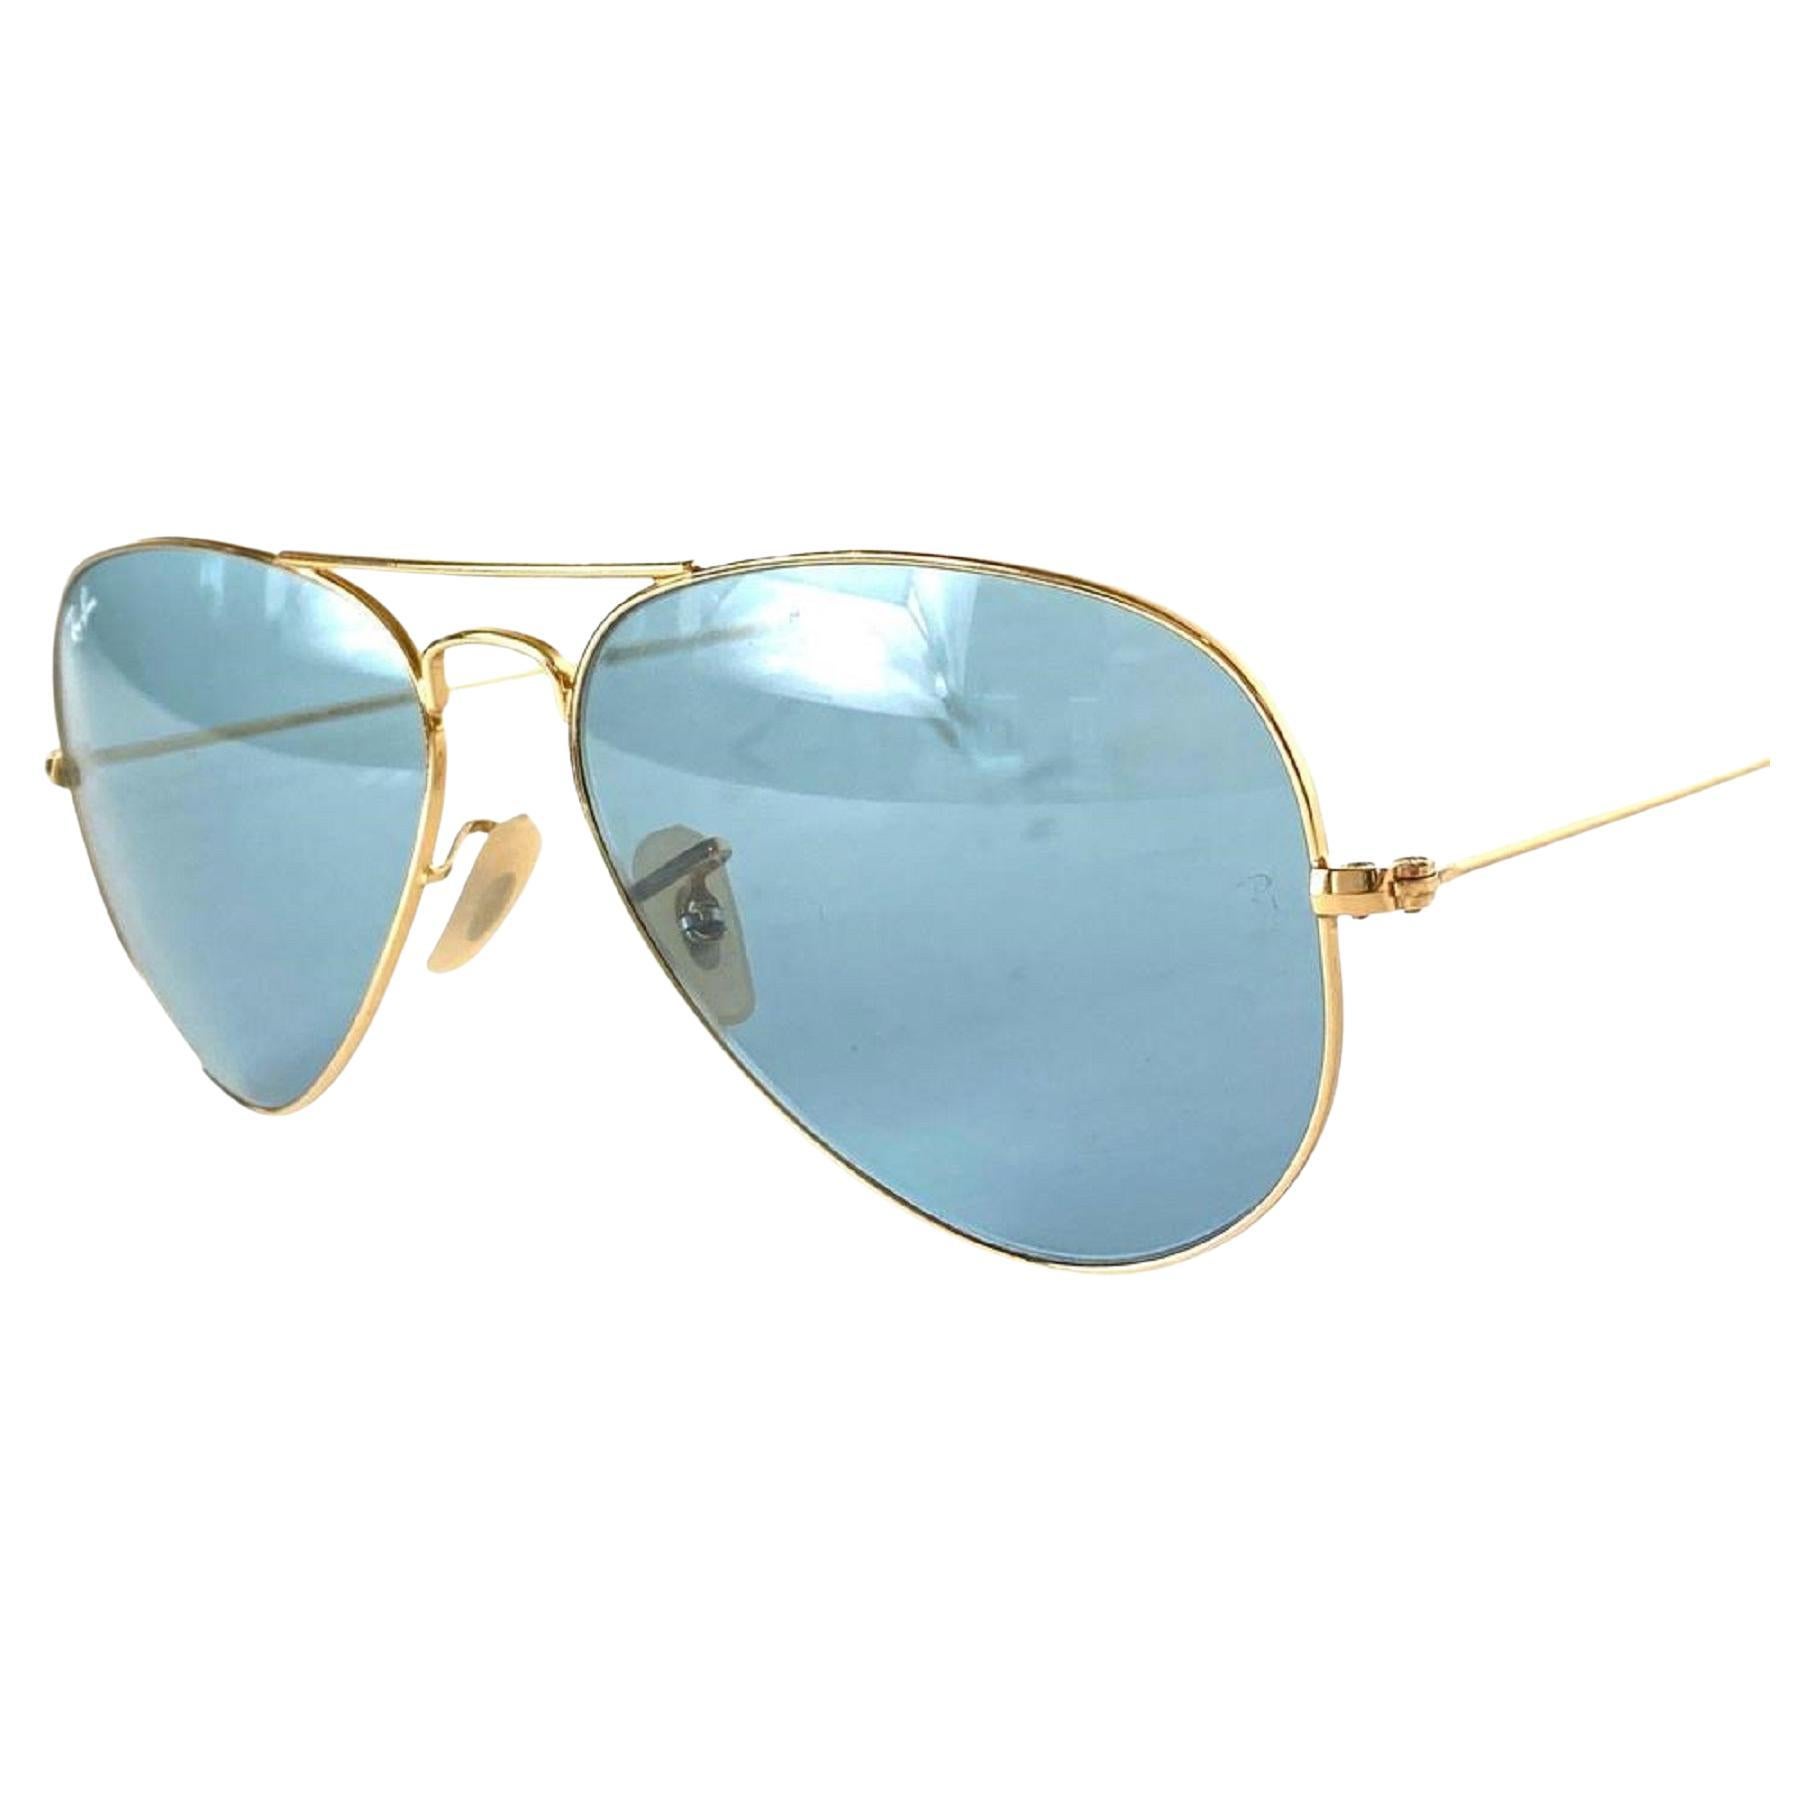 Ray-Ban Gold Rb3025 Aviator 2ray65 Sunglasses For Sale